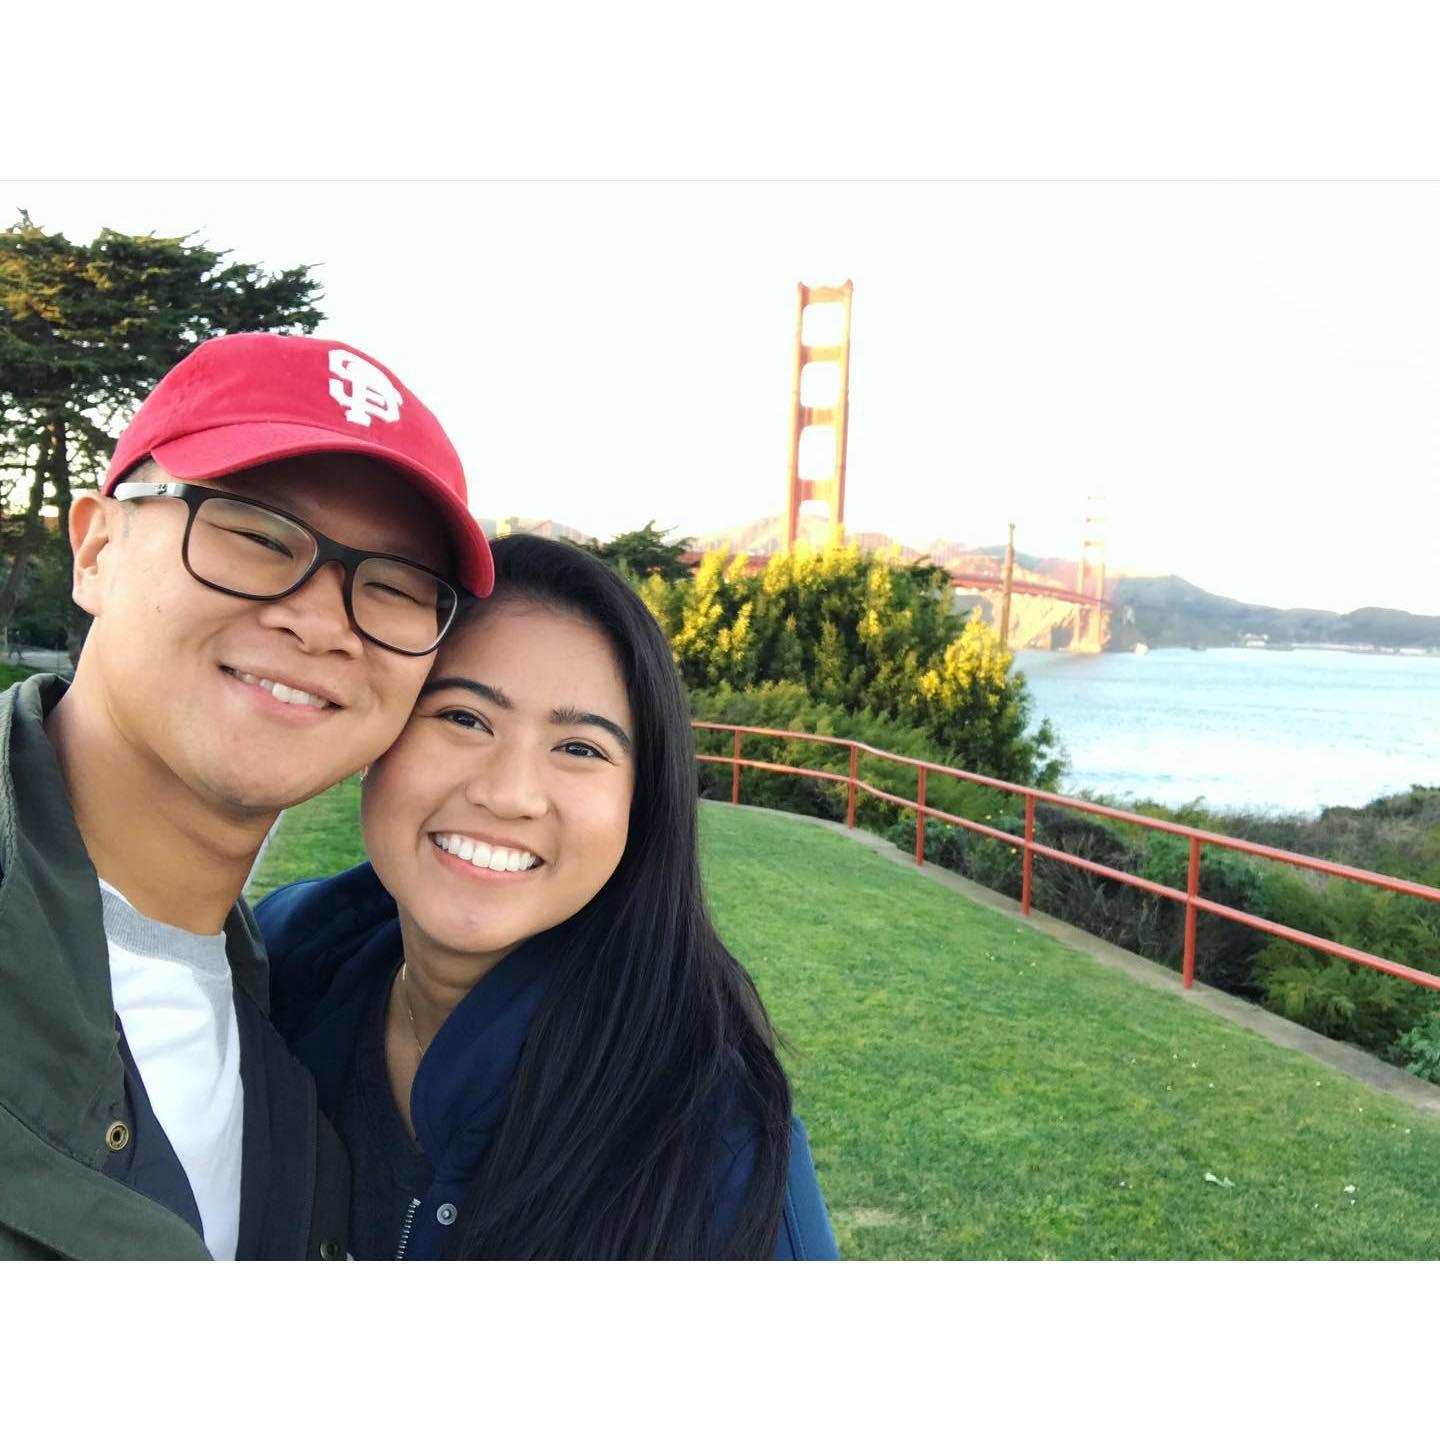 Our first time visiting San Francisco together, January 2020